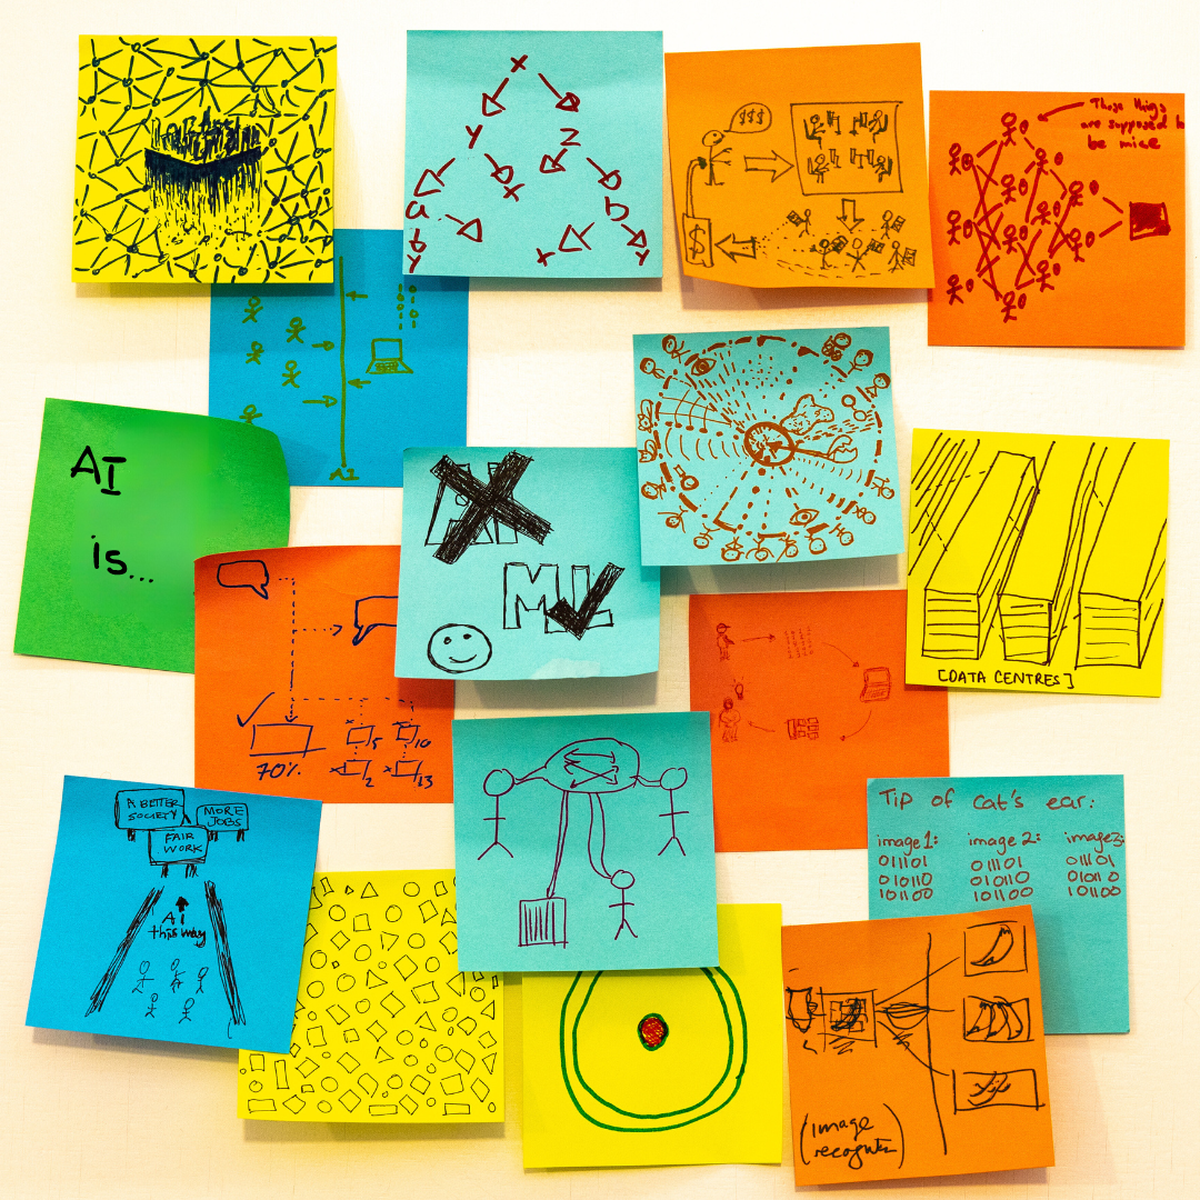 Seventeen multicoloured post-it notes are roughly positioned in a square shape on a white board. Each one of them has a hand drawn sketch in pen on them, answering the prompt on one of the post-it notes 